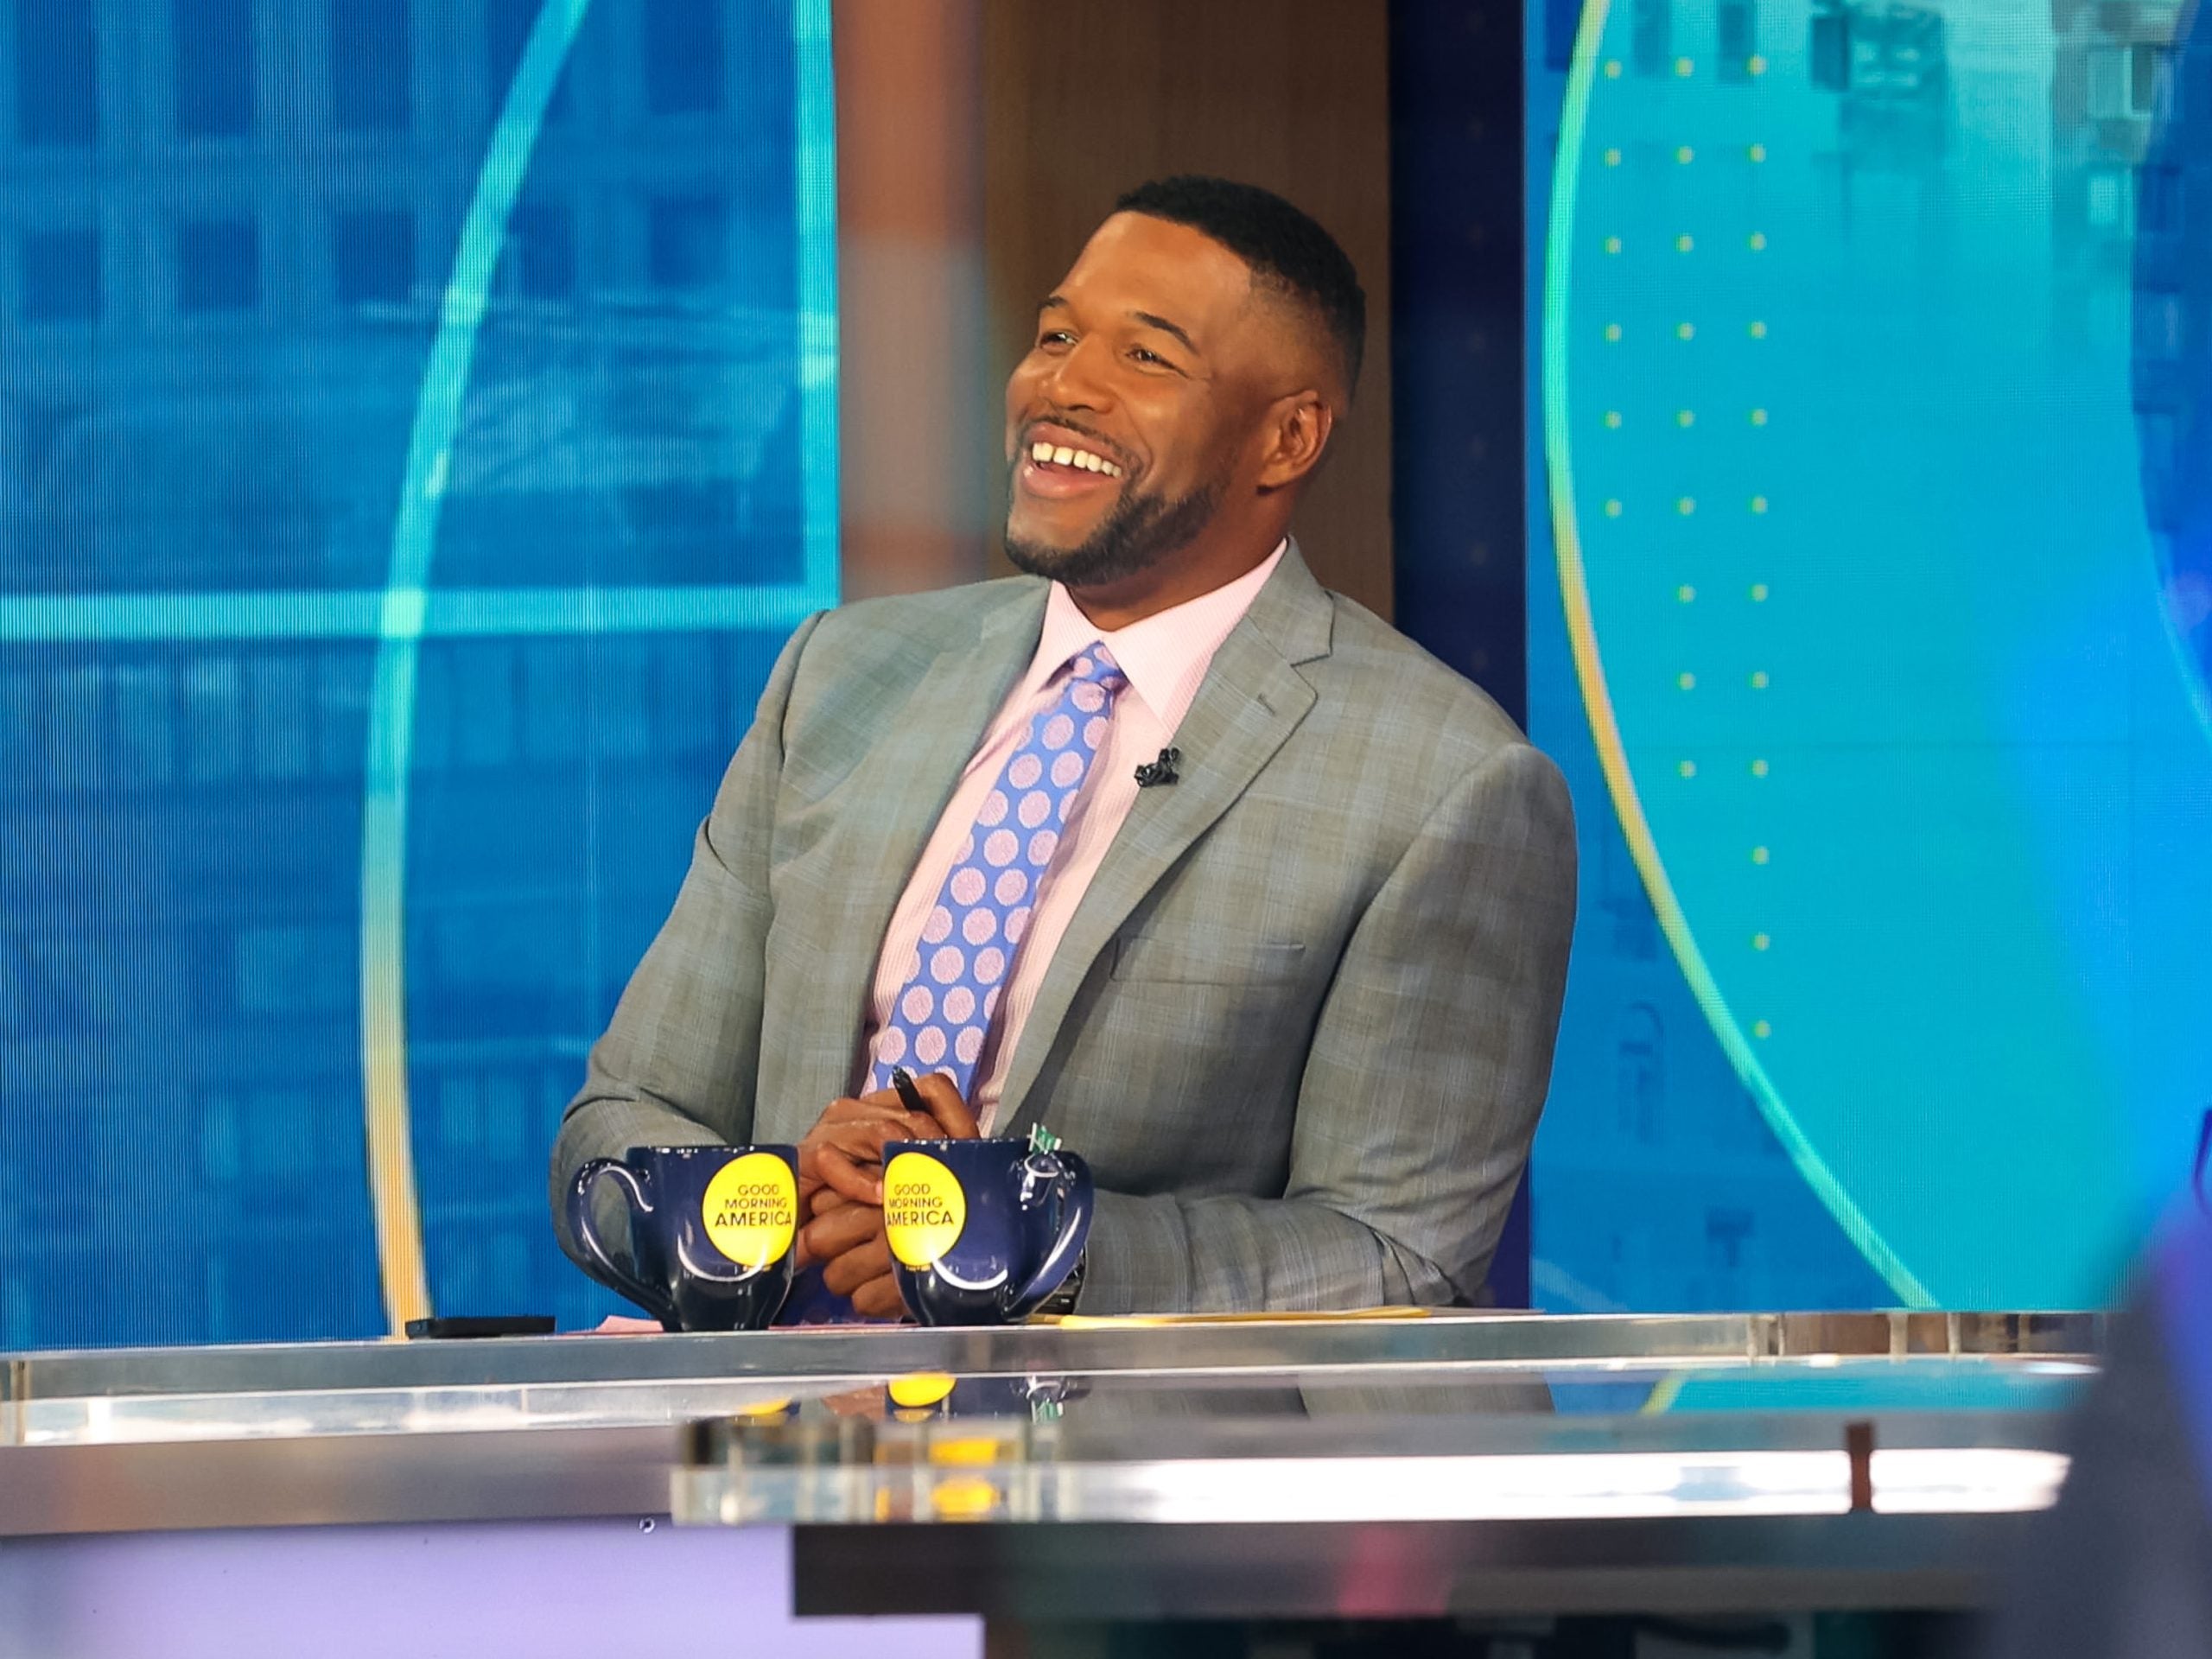 Michael Strahan Missing From 'Good Morning America' For Second Week In A Row Due To 'Personal Family Matters'